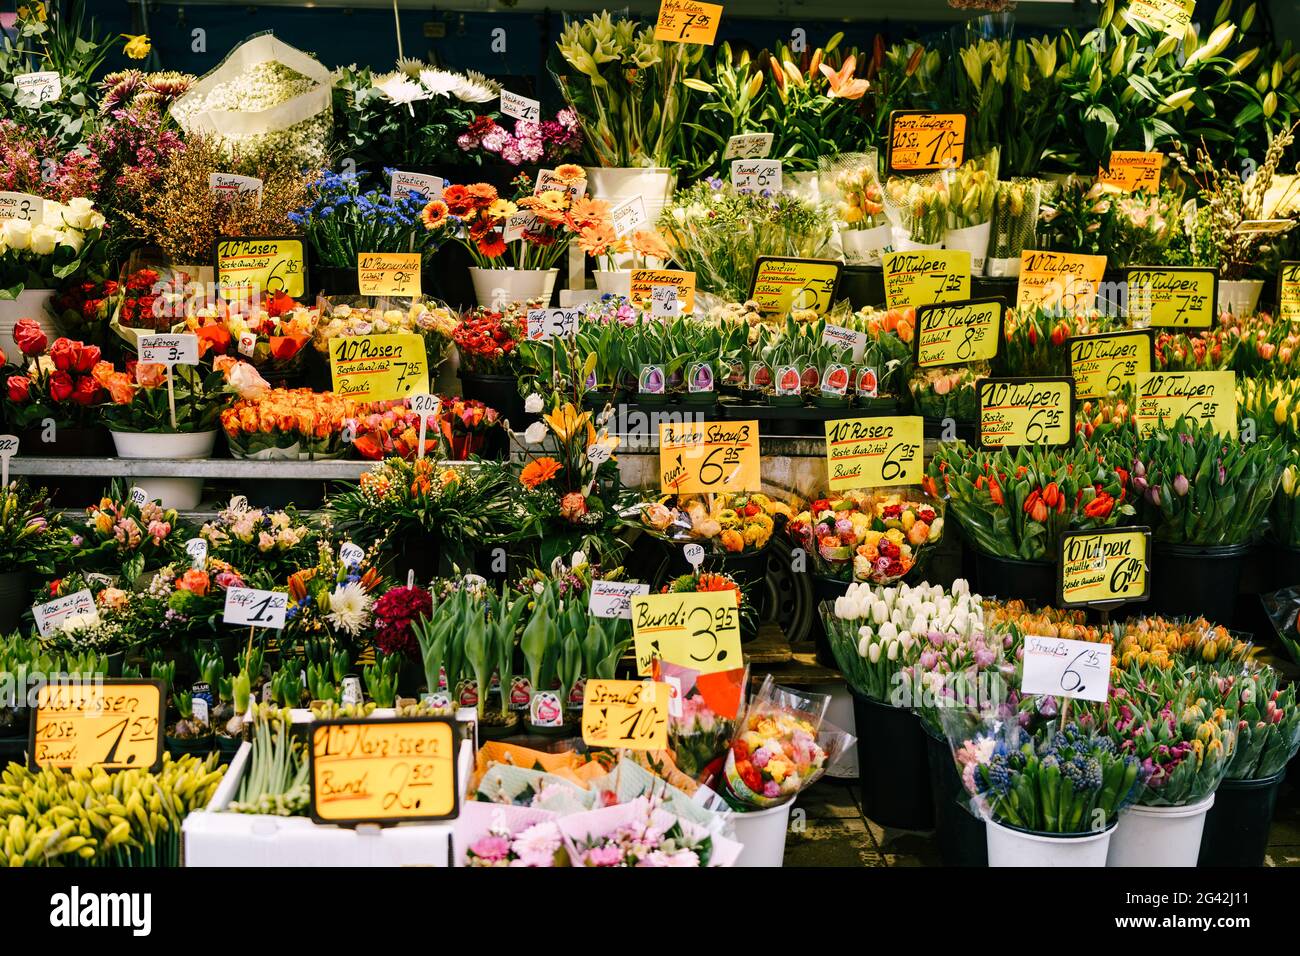 Munich, GERMANY - 9 MARCH 2018: A flower shop. A flower stall in Germany. Shop counter with flowers Stock Photo